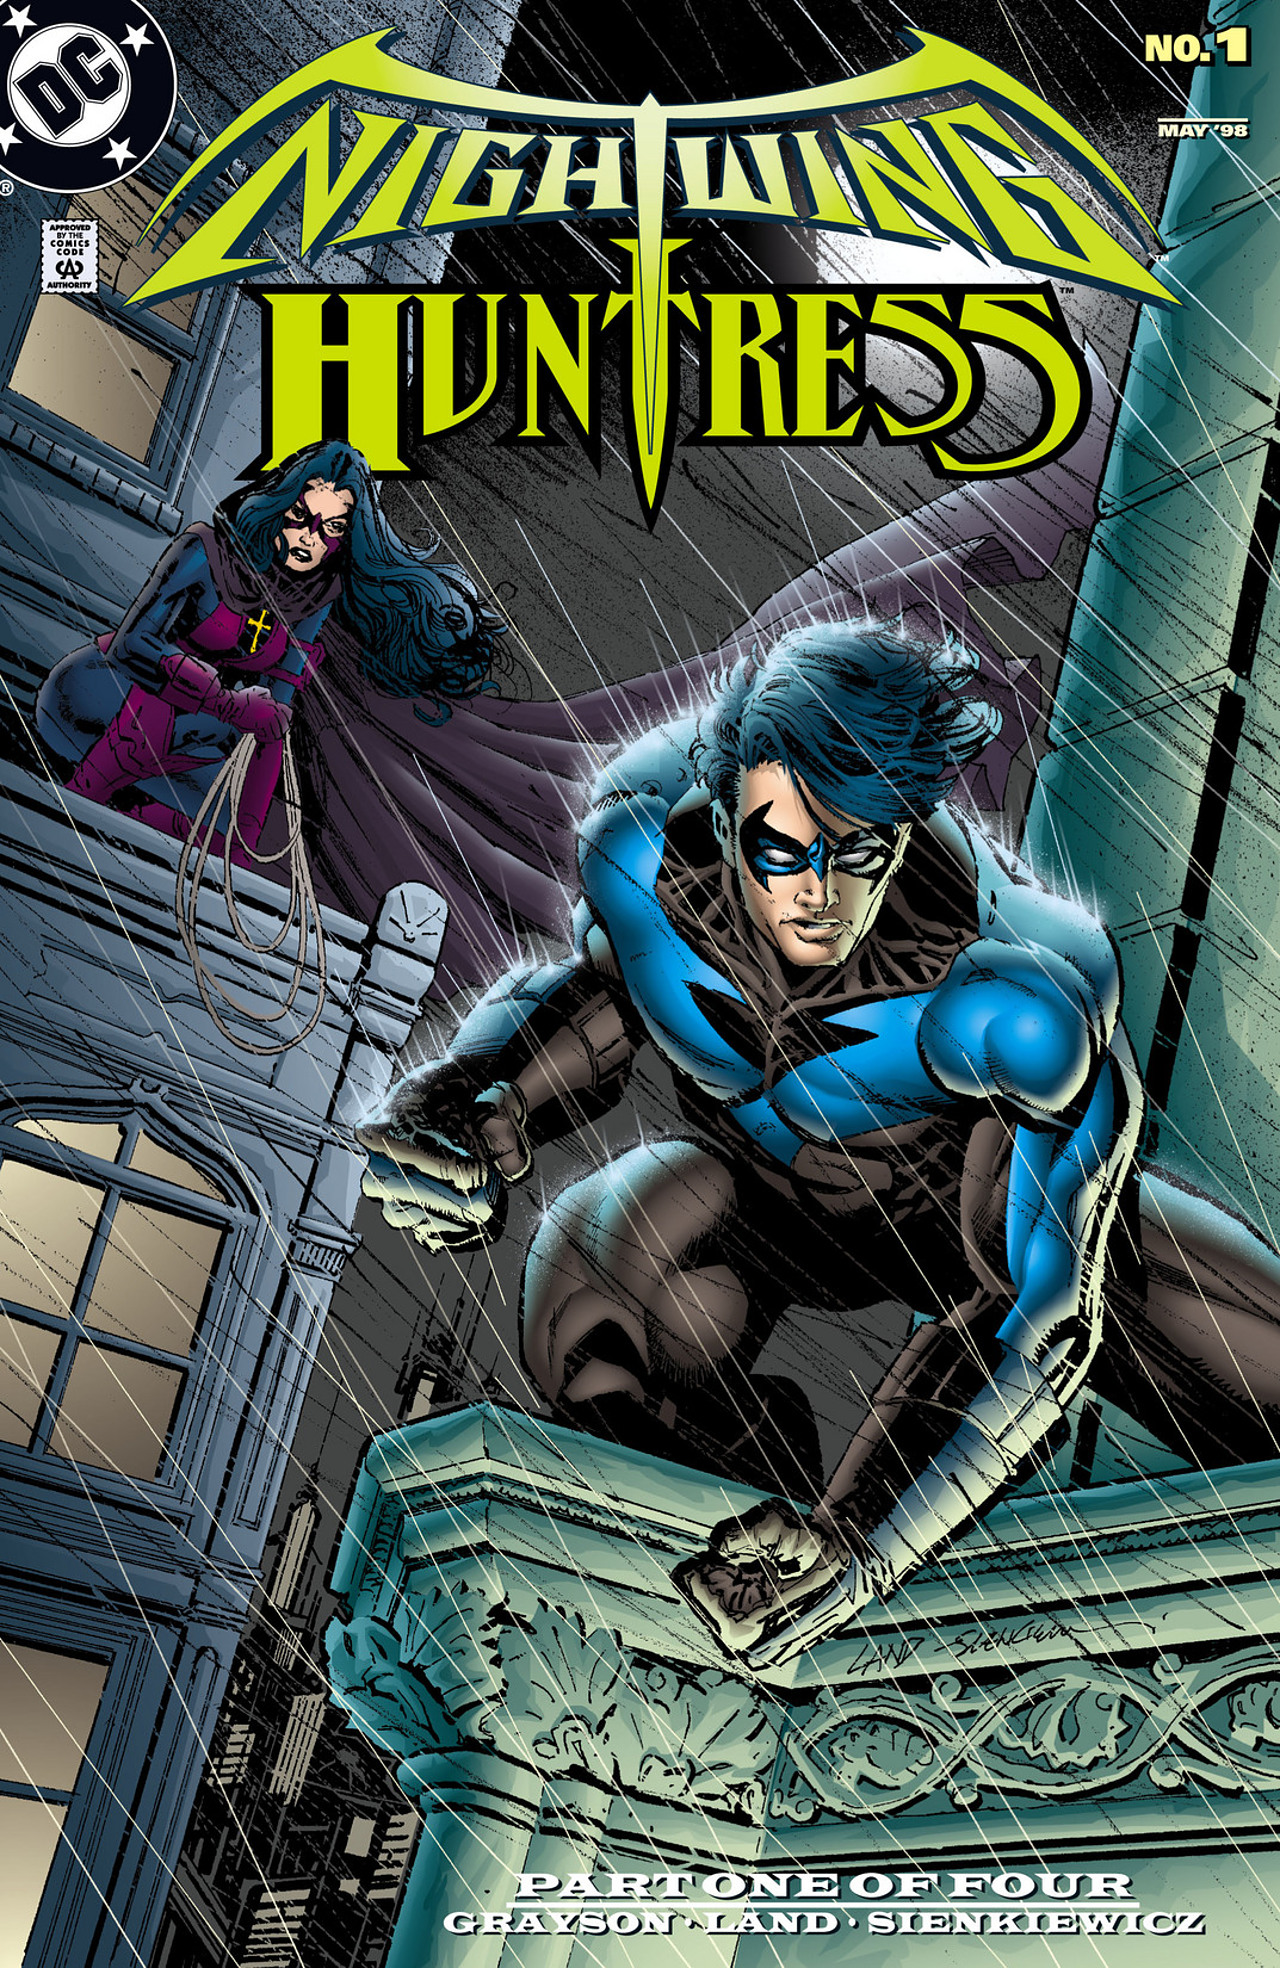 Read online Nightwing and Huntress comic -  Issue #1 - 1